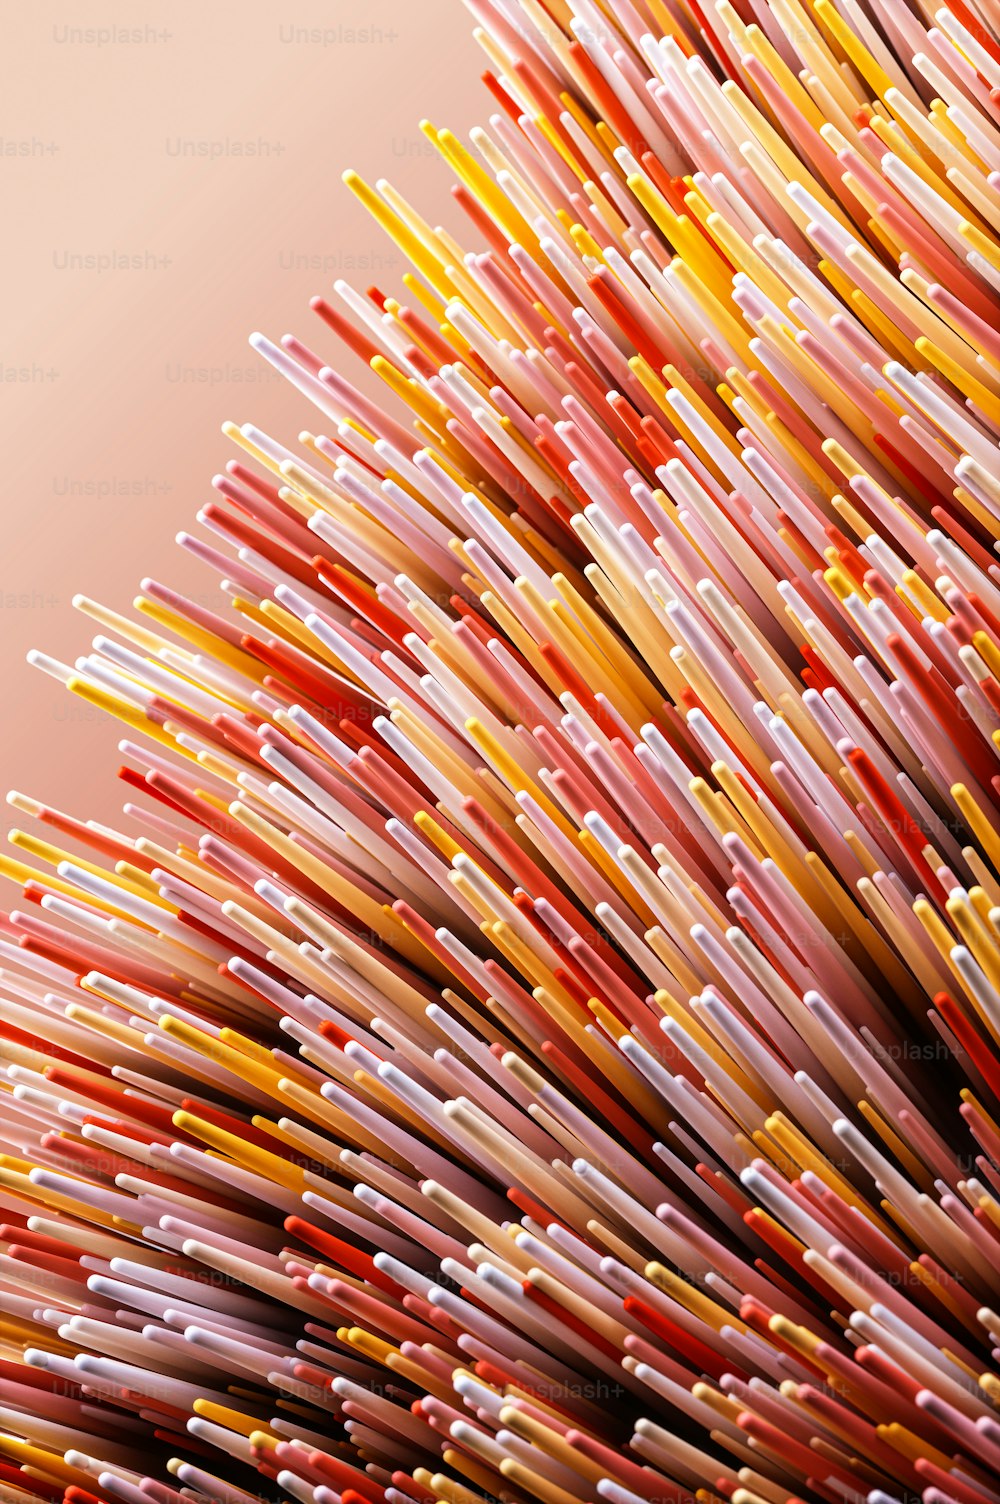 a large pile of colorful toothbrushes sitting on top of a table